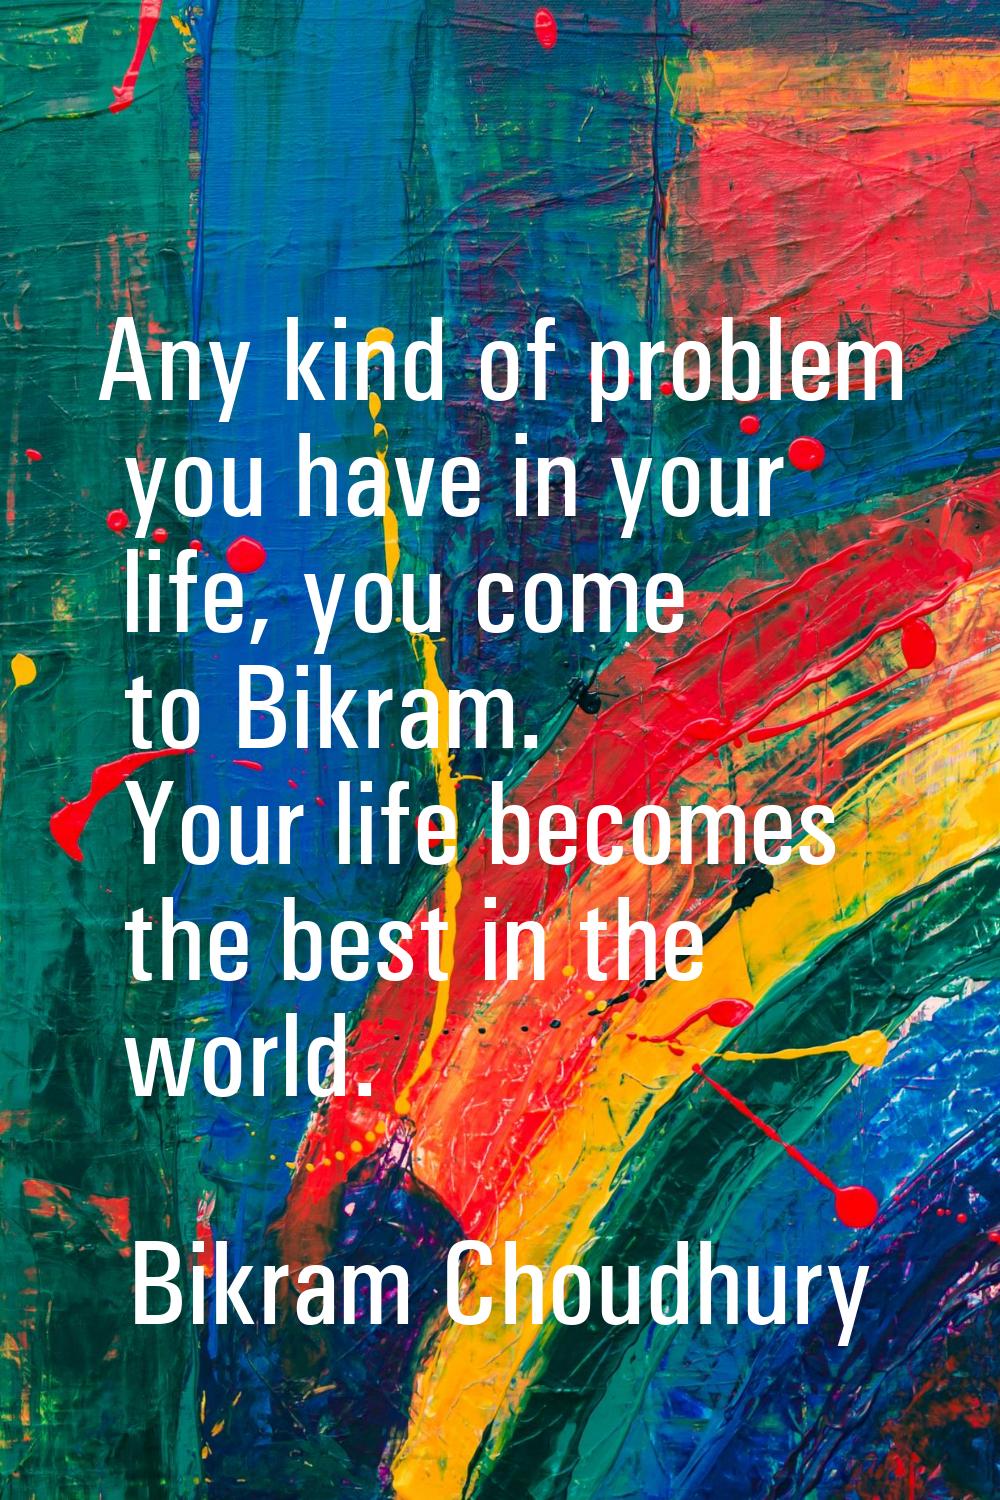 Any kind of problem you have in your life, you come to Bikram. Your life becomes the best in the wo